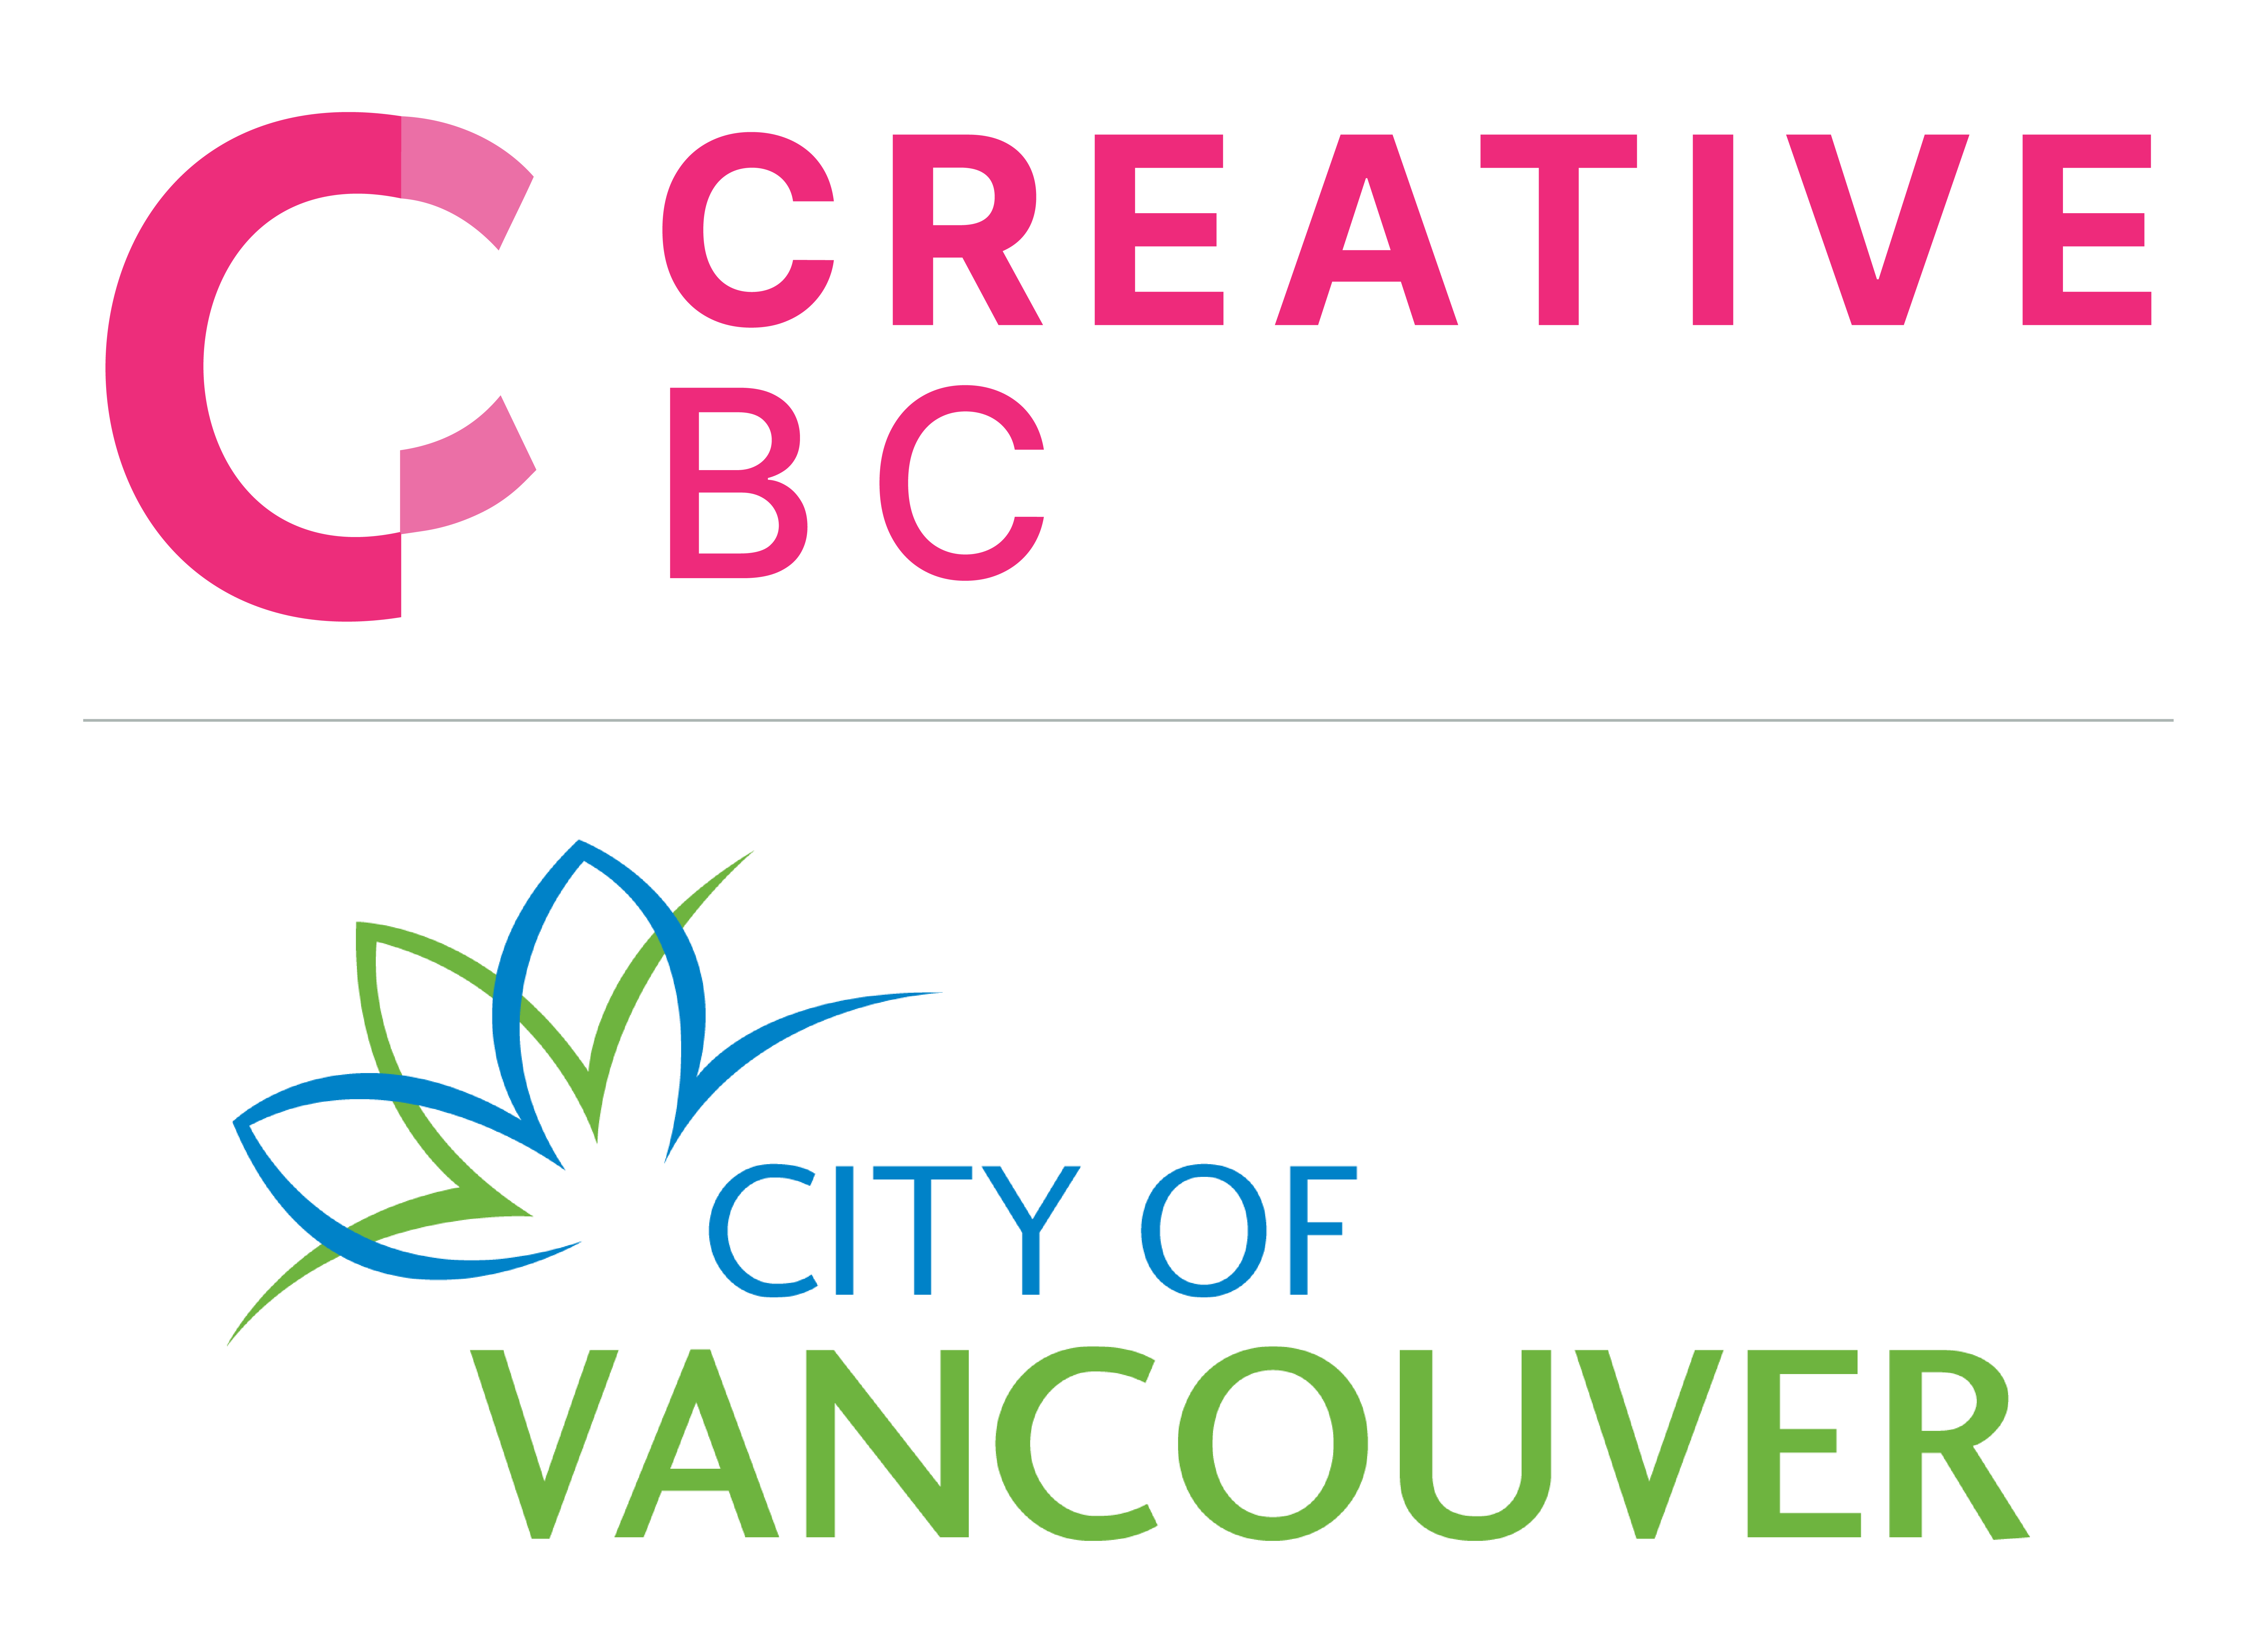 The pink Creative BC logo is shown over the blue and green City of Vancouver logo